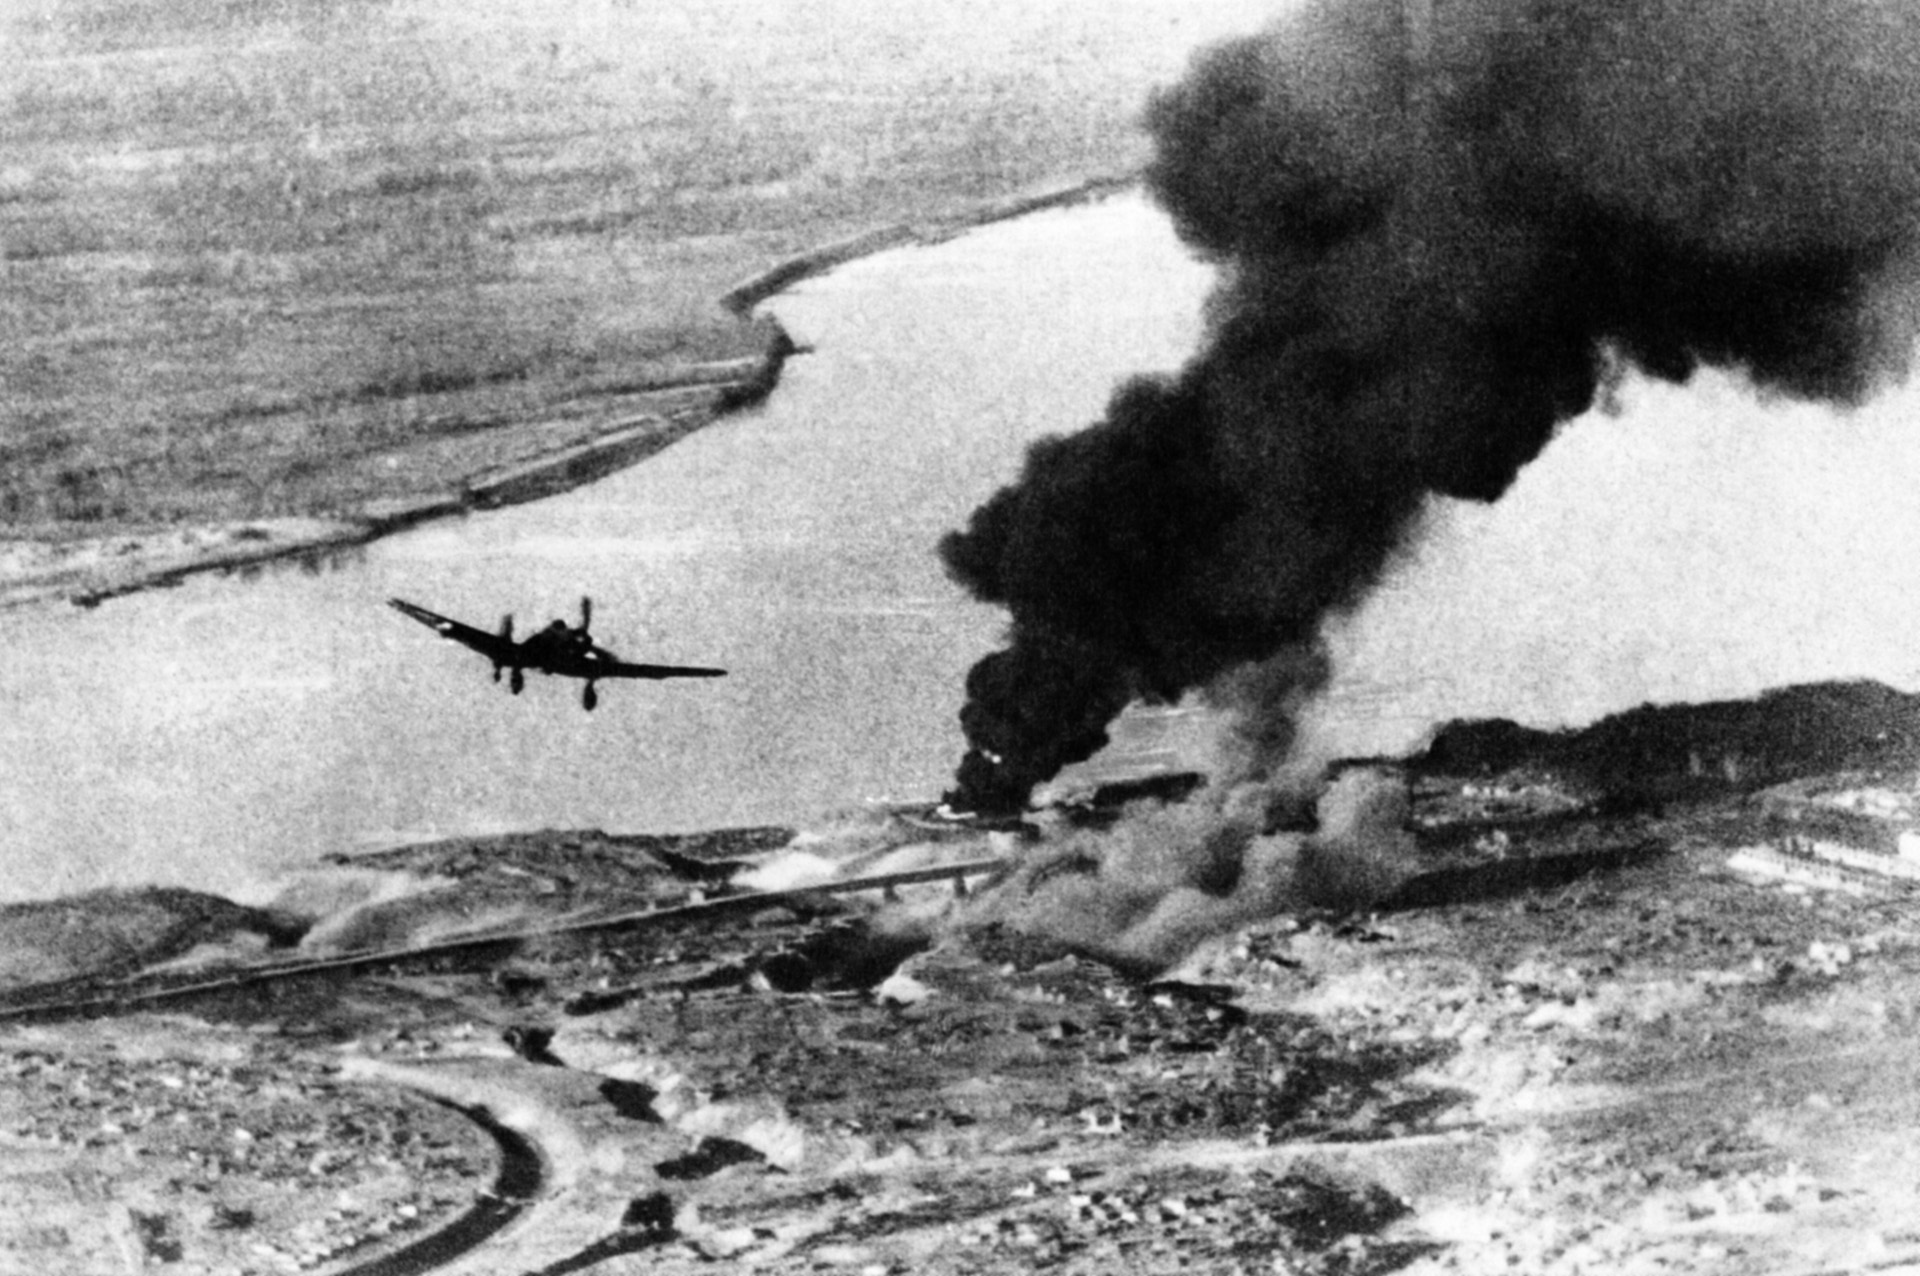 Leaving its target along the Volga River on the outskirts of Stalingrad burning, a Stuka dive bomber pulls up and heads for its home base.